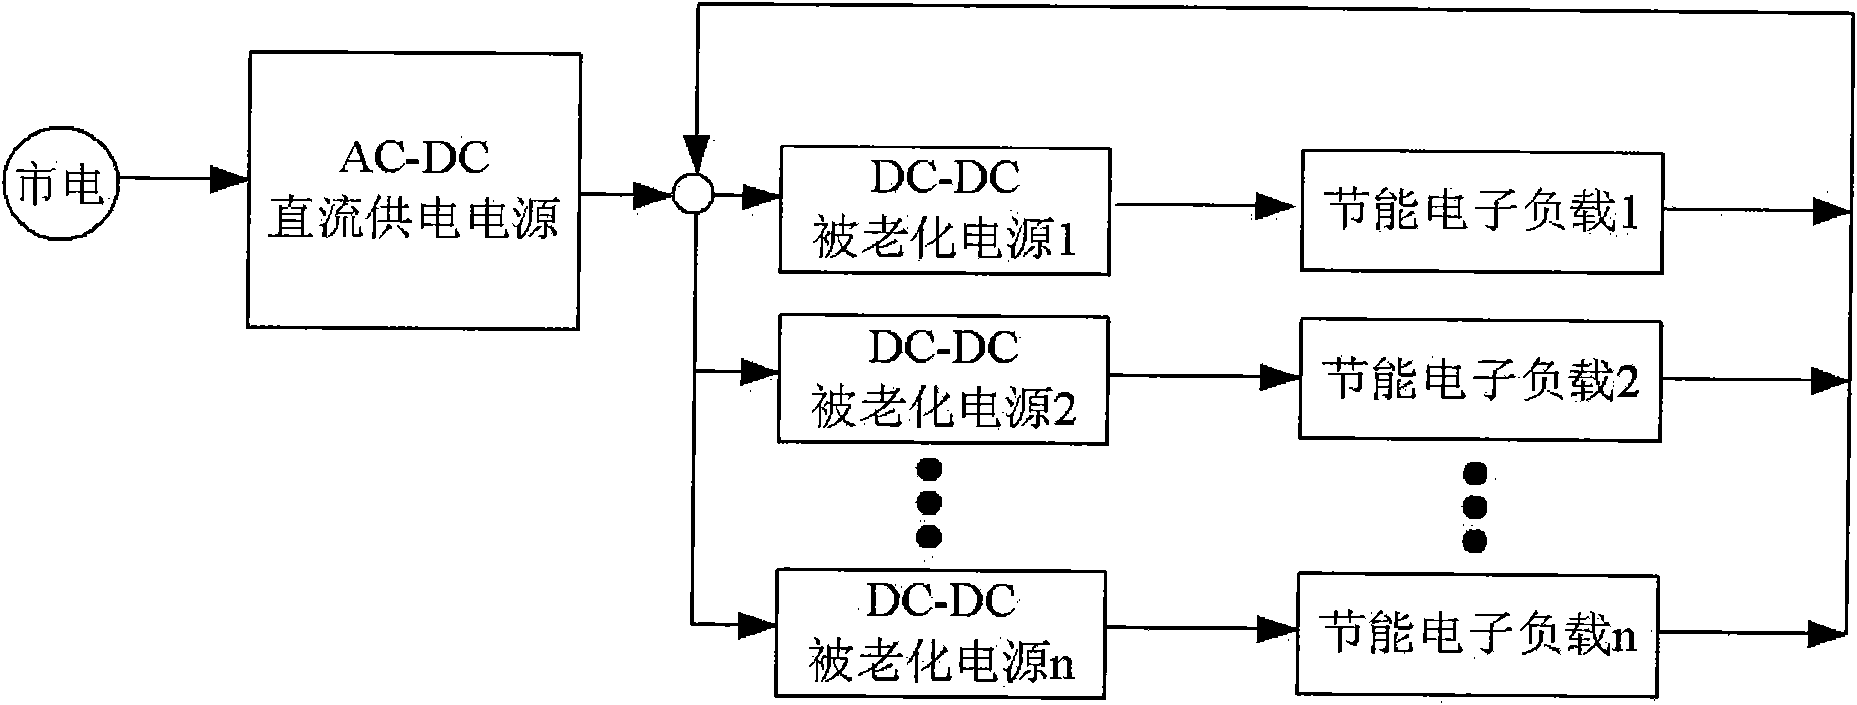 Method for aging of low-voltage, high-current and non-isolated DC-DC power supply